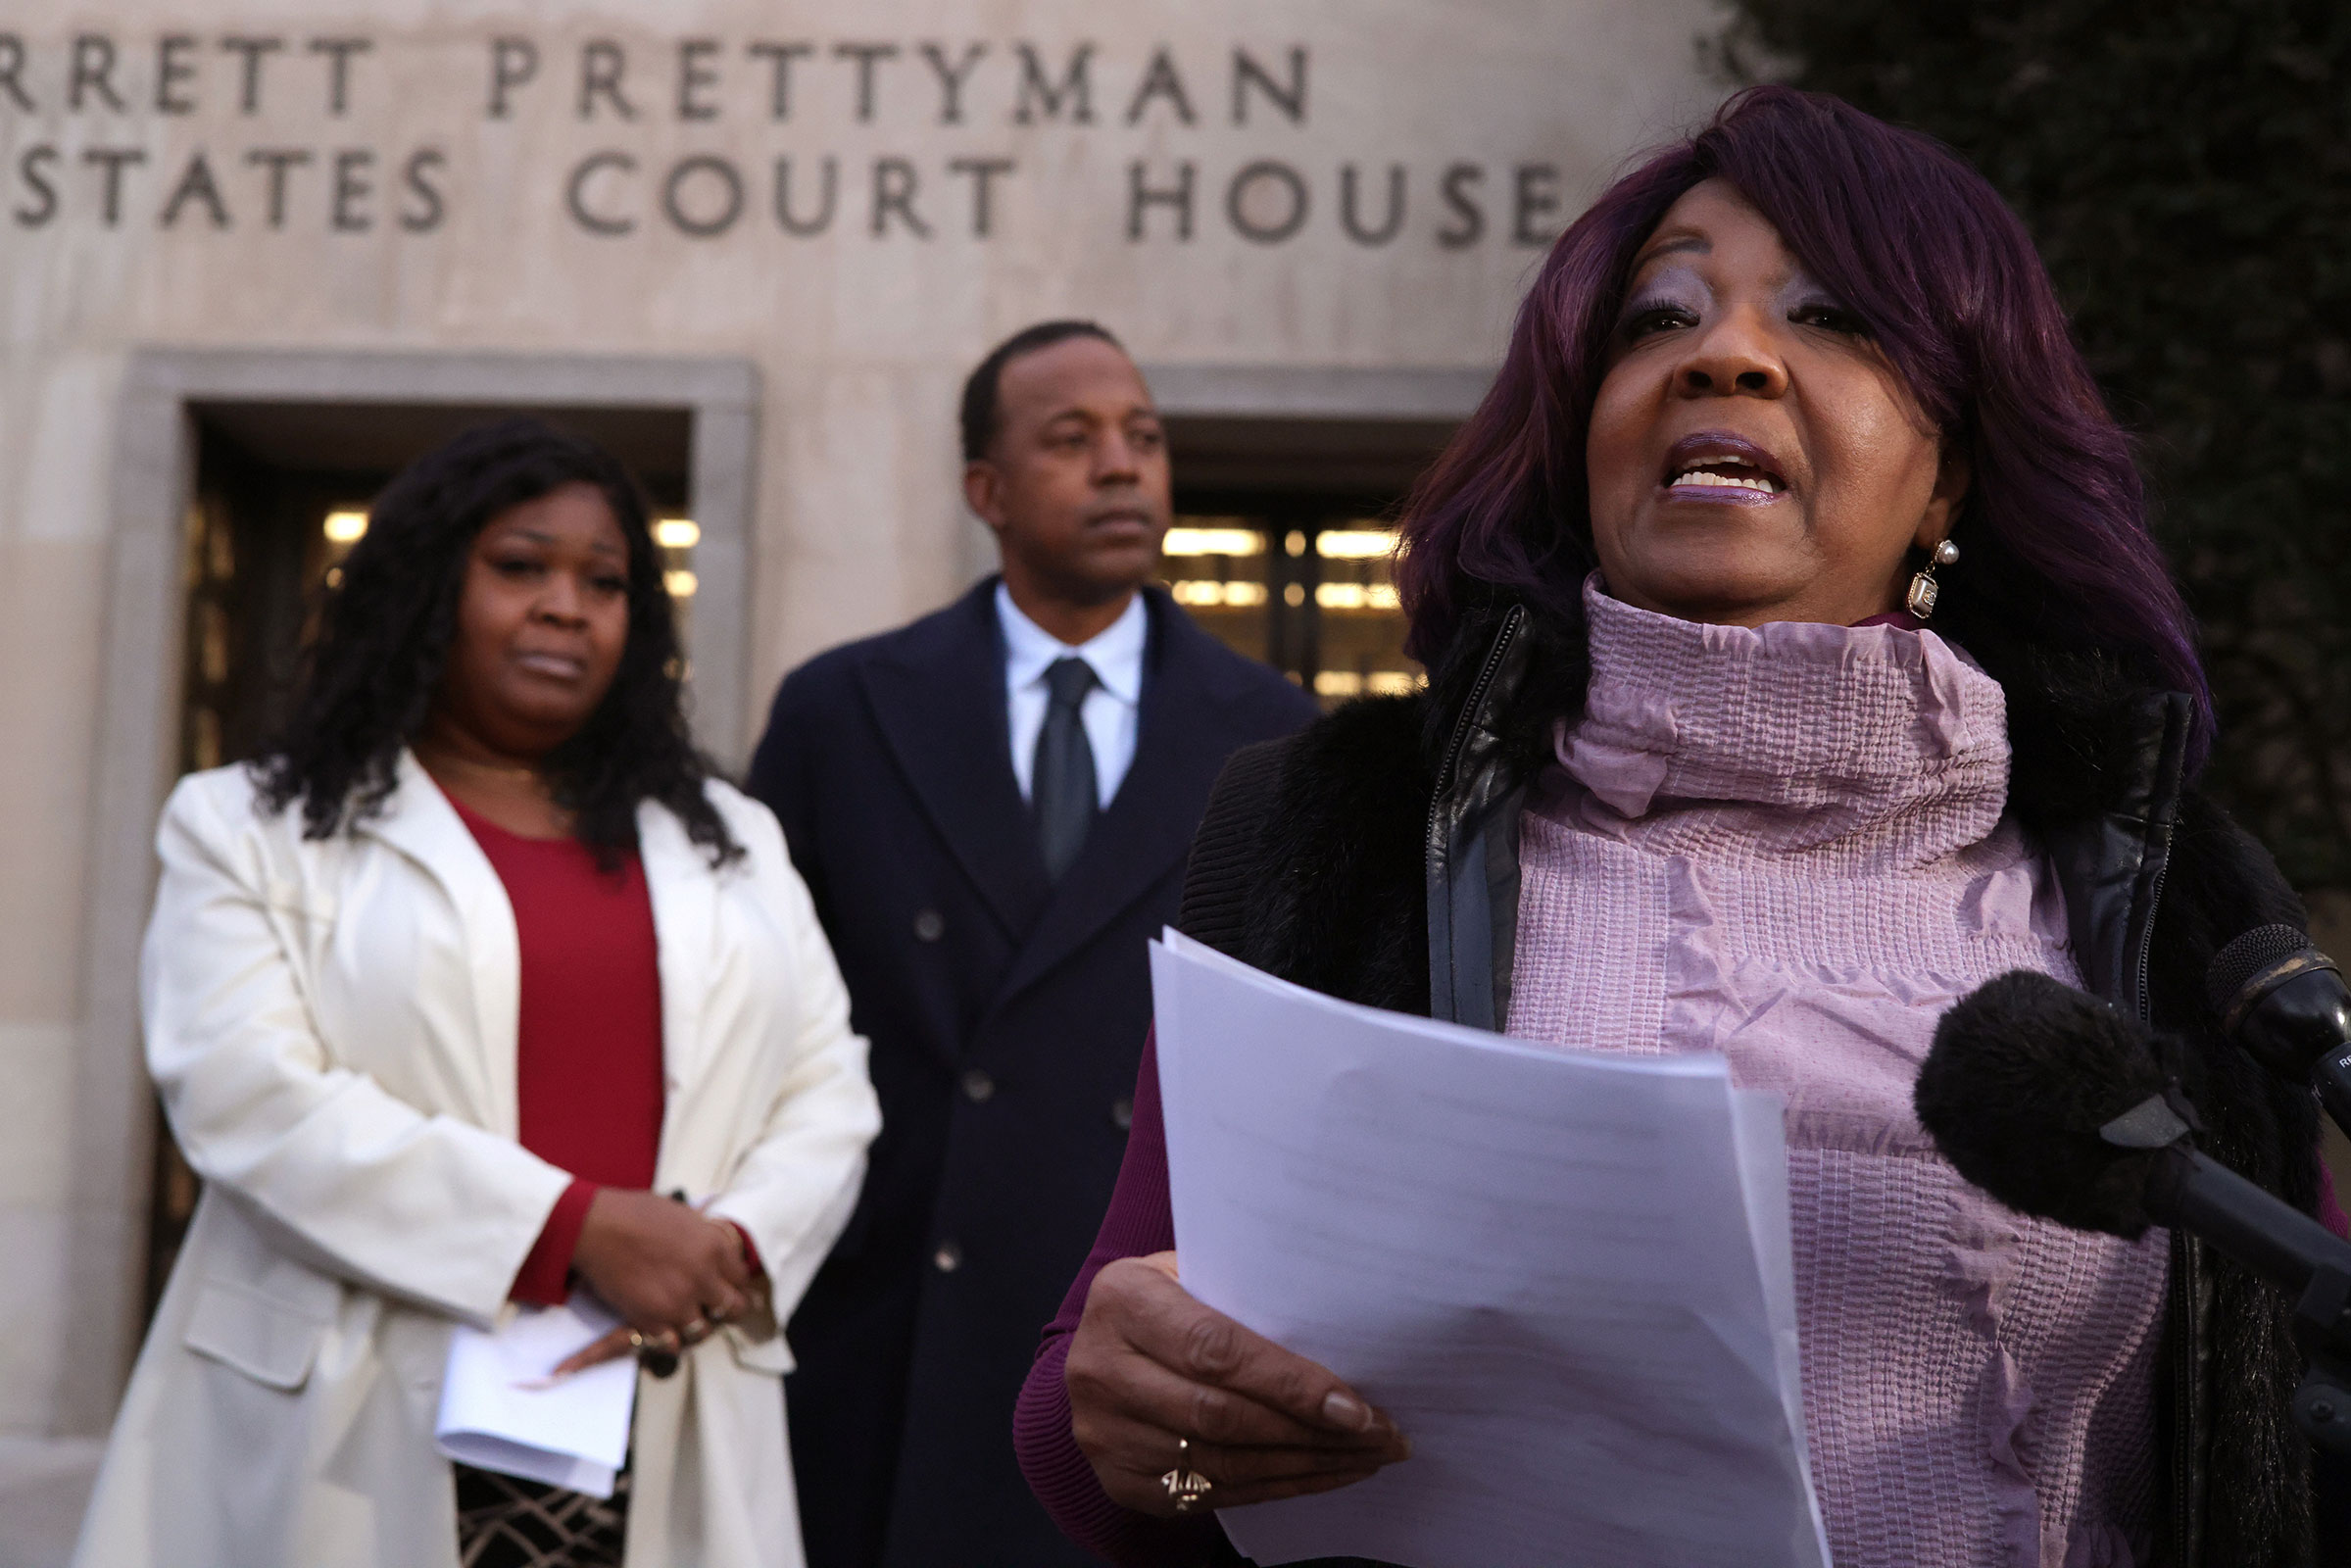 Georgia election workers Ruby Freeman and her daughter Shaye Moss speak outside of the E. Barrett Prettyman U.S. District Courthouse on December 15, 2023 in Washington, DC.